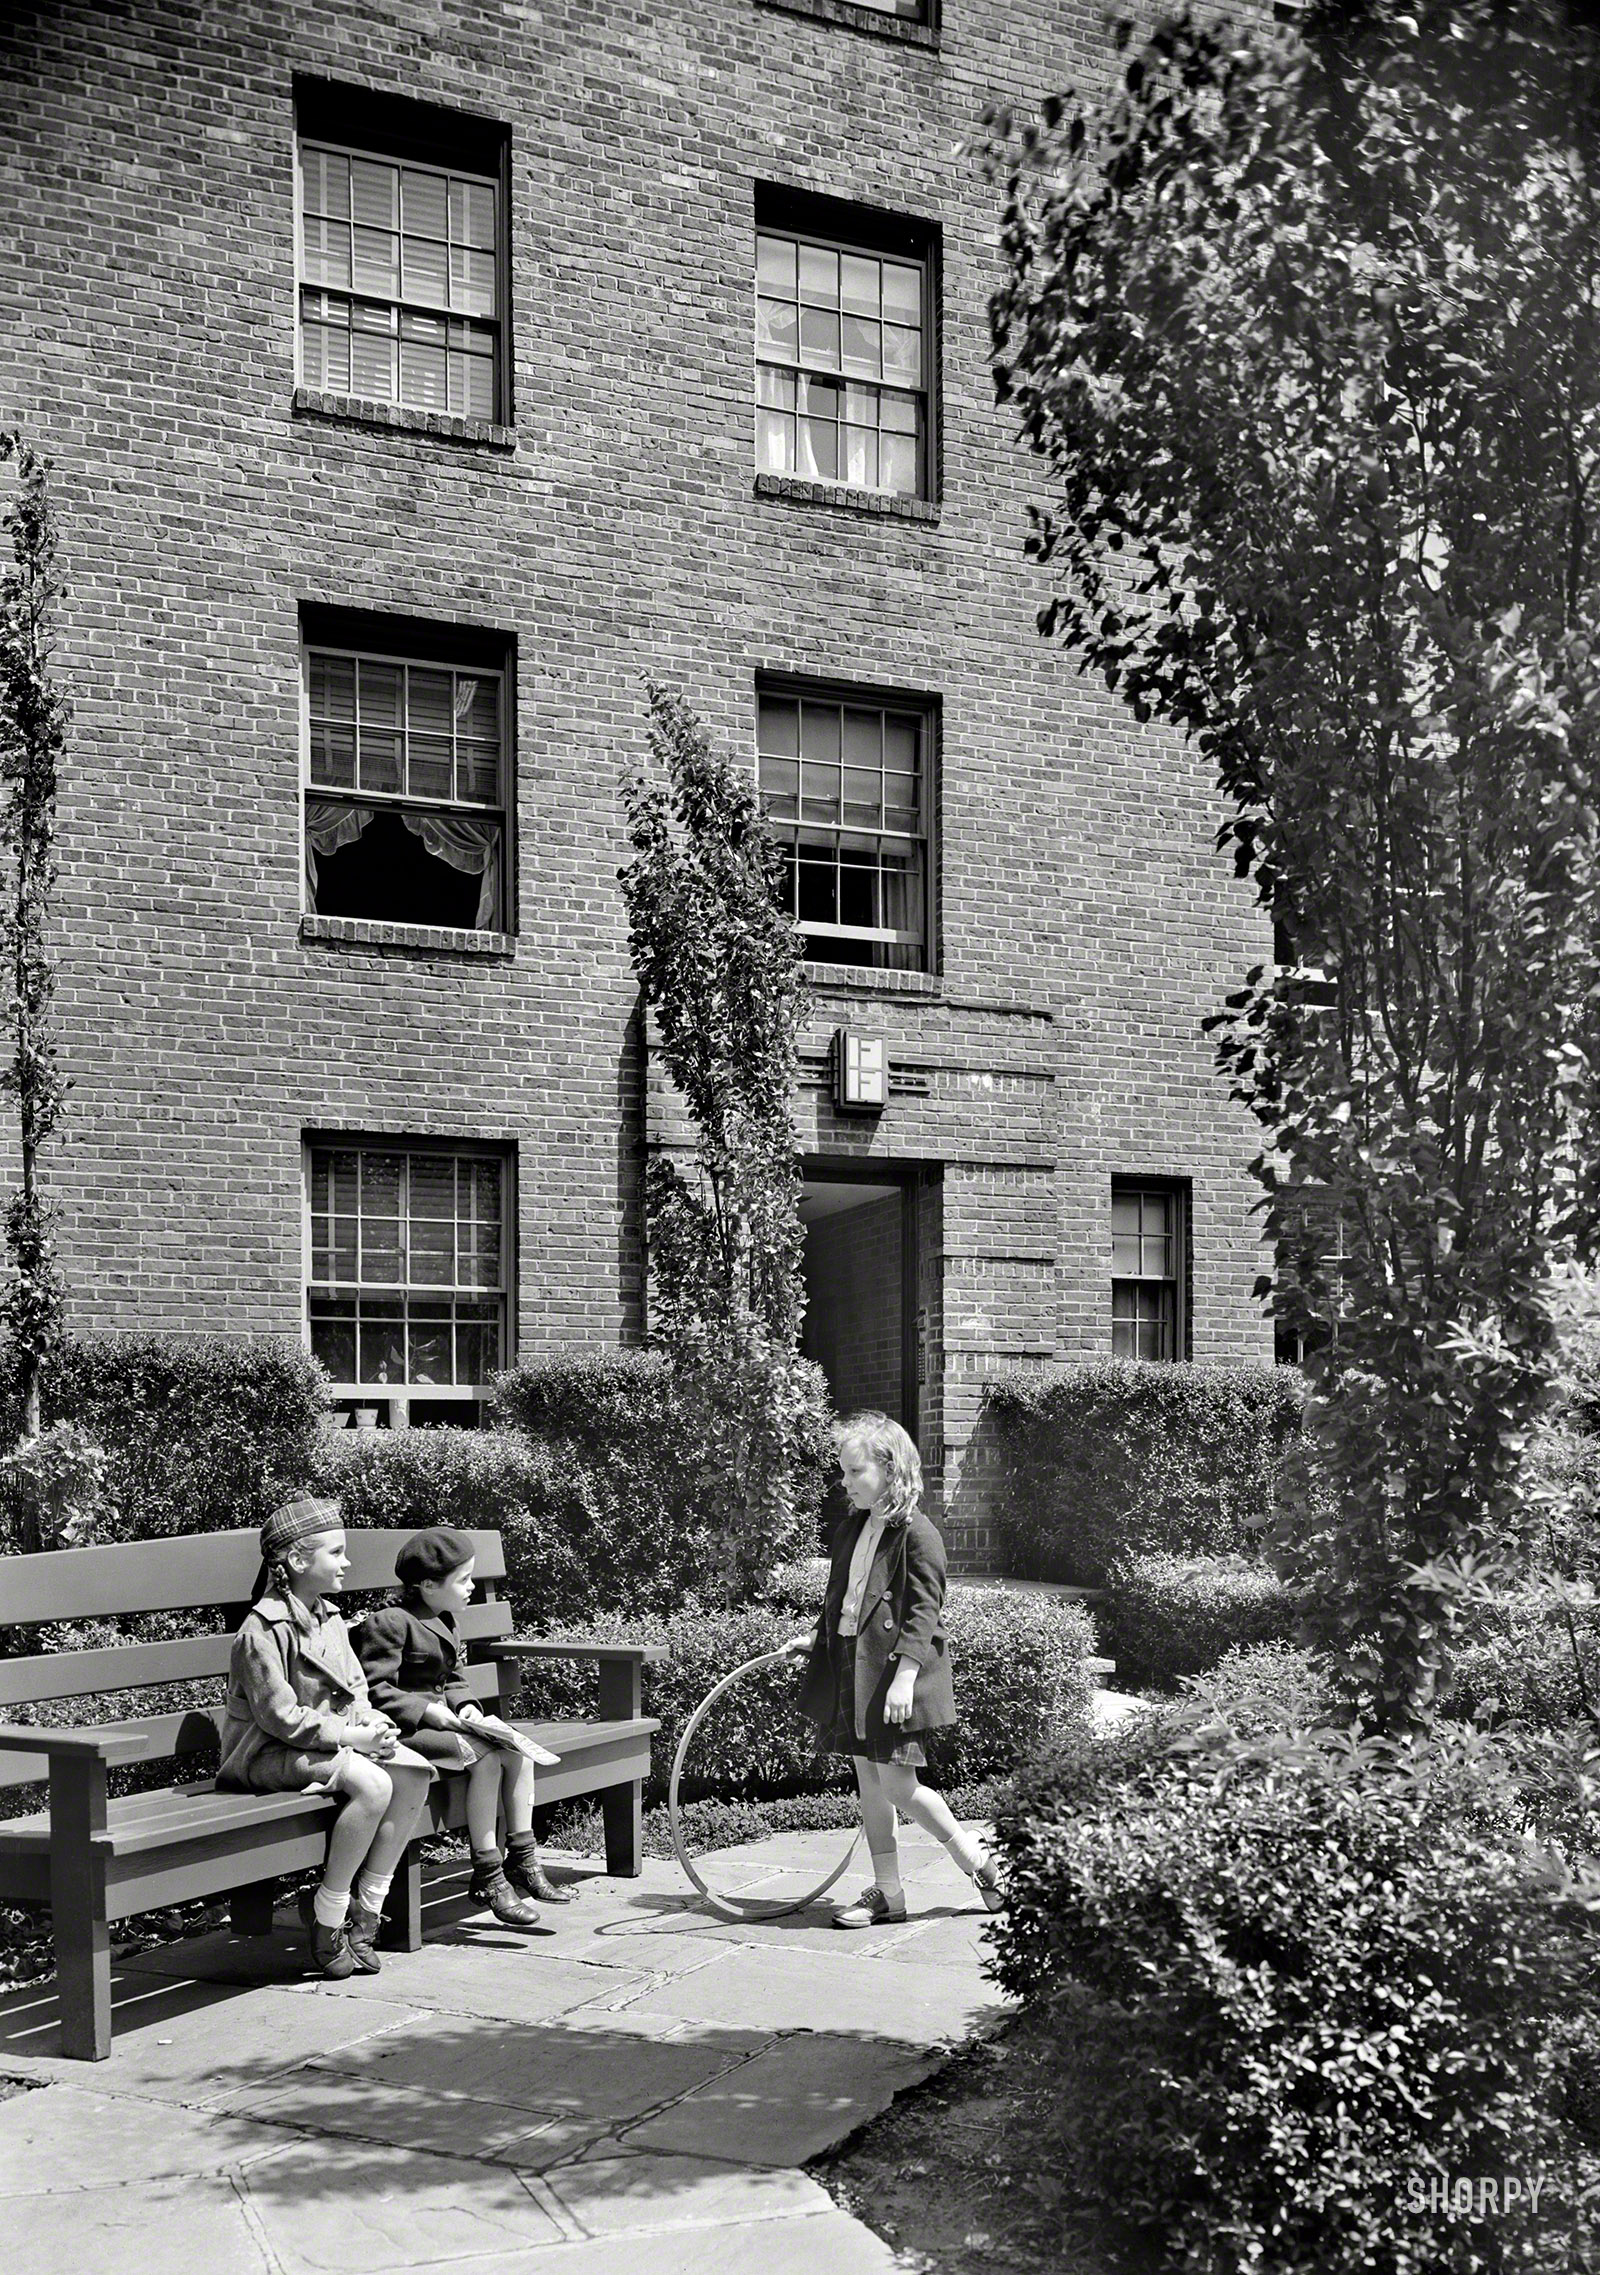 May 17, 1940. "Phipps Garden Apartments, 5101 39th Avenue, Long Island City, New York. Clarence S. Stein, architect." Hanging with a big girl whose feet touch the ground. Large-format negative by Gottscho-Schleisner. View full size.